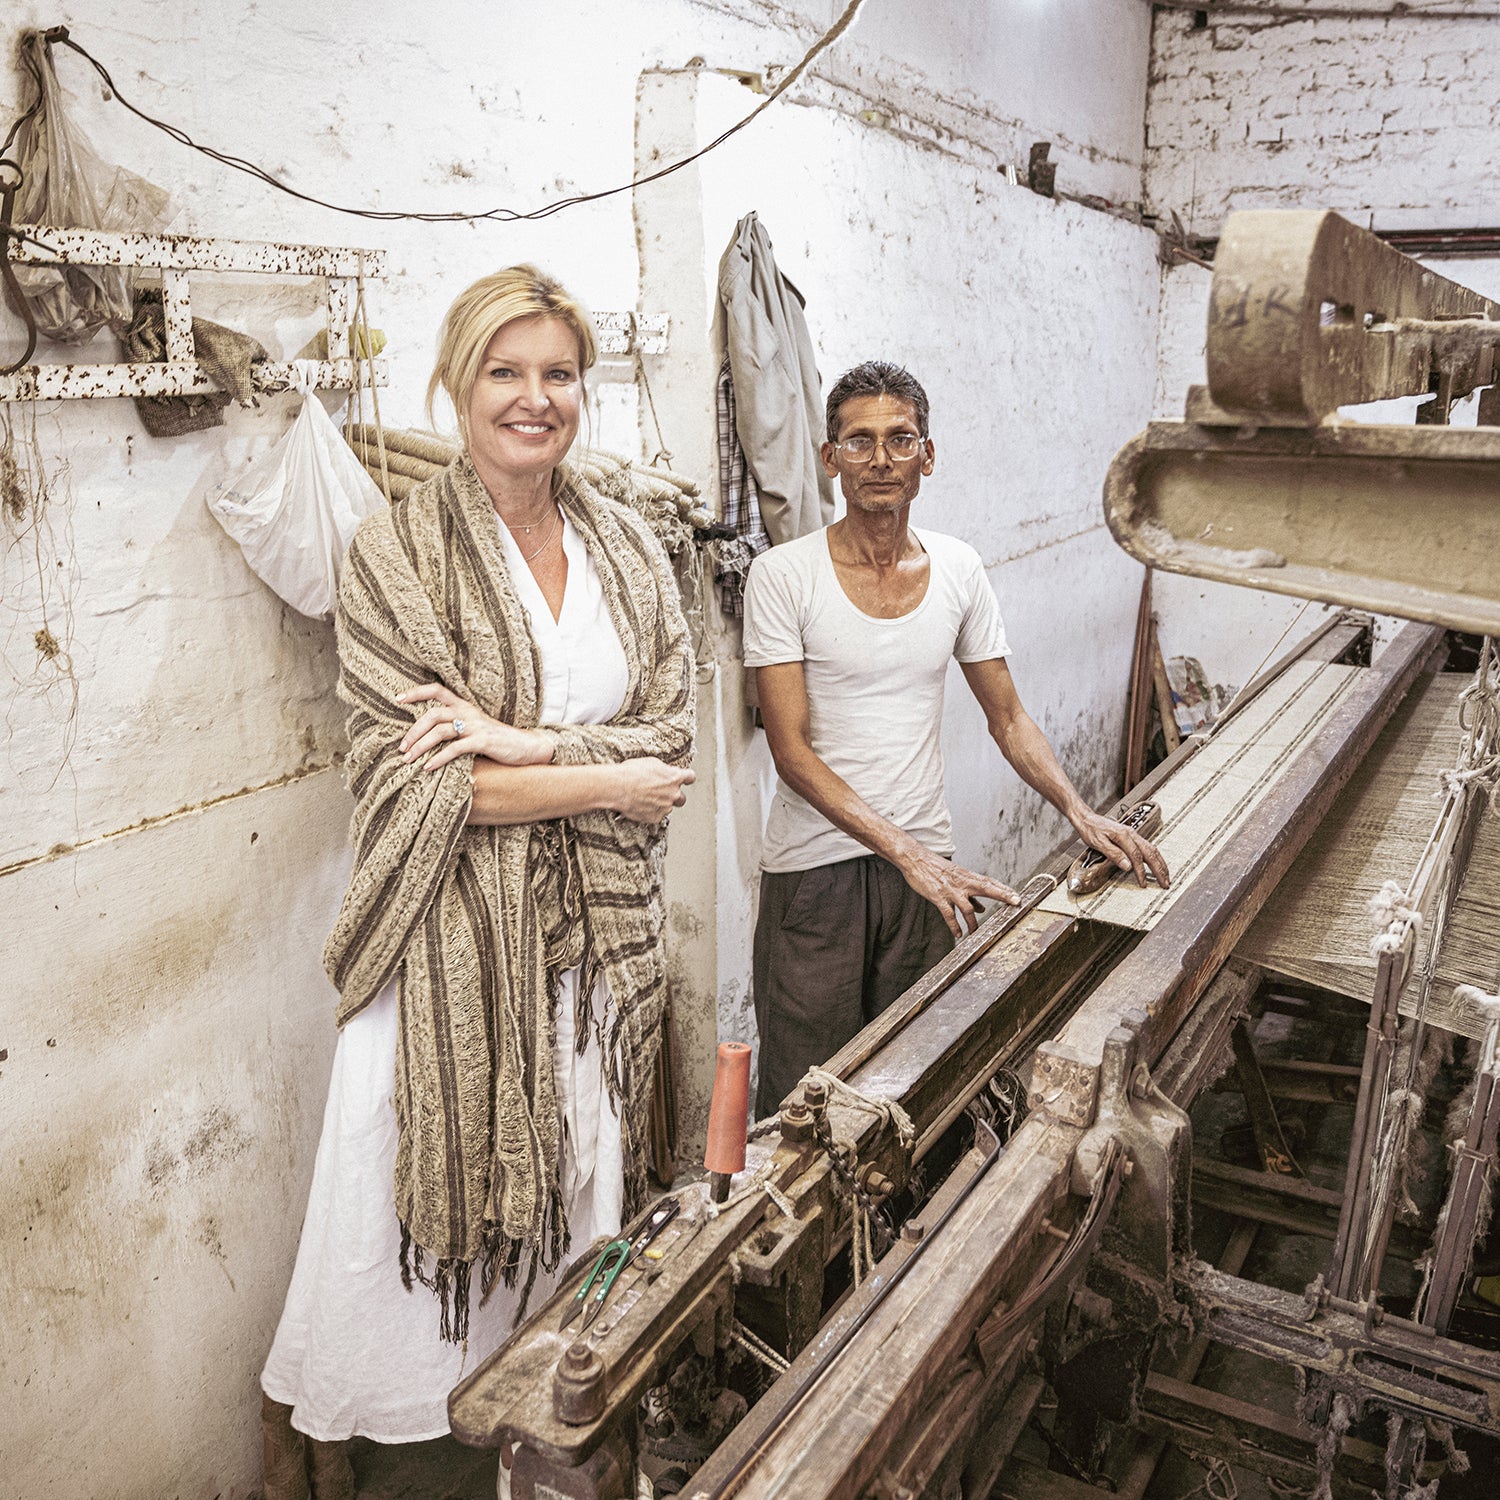 Indian artisans in ethical factories hand looming